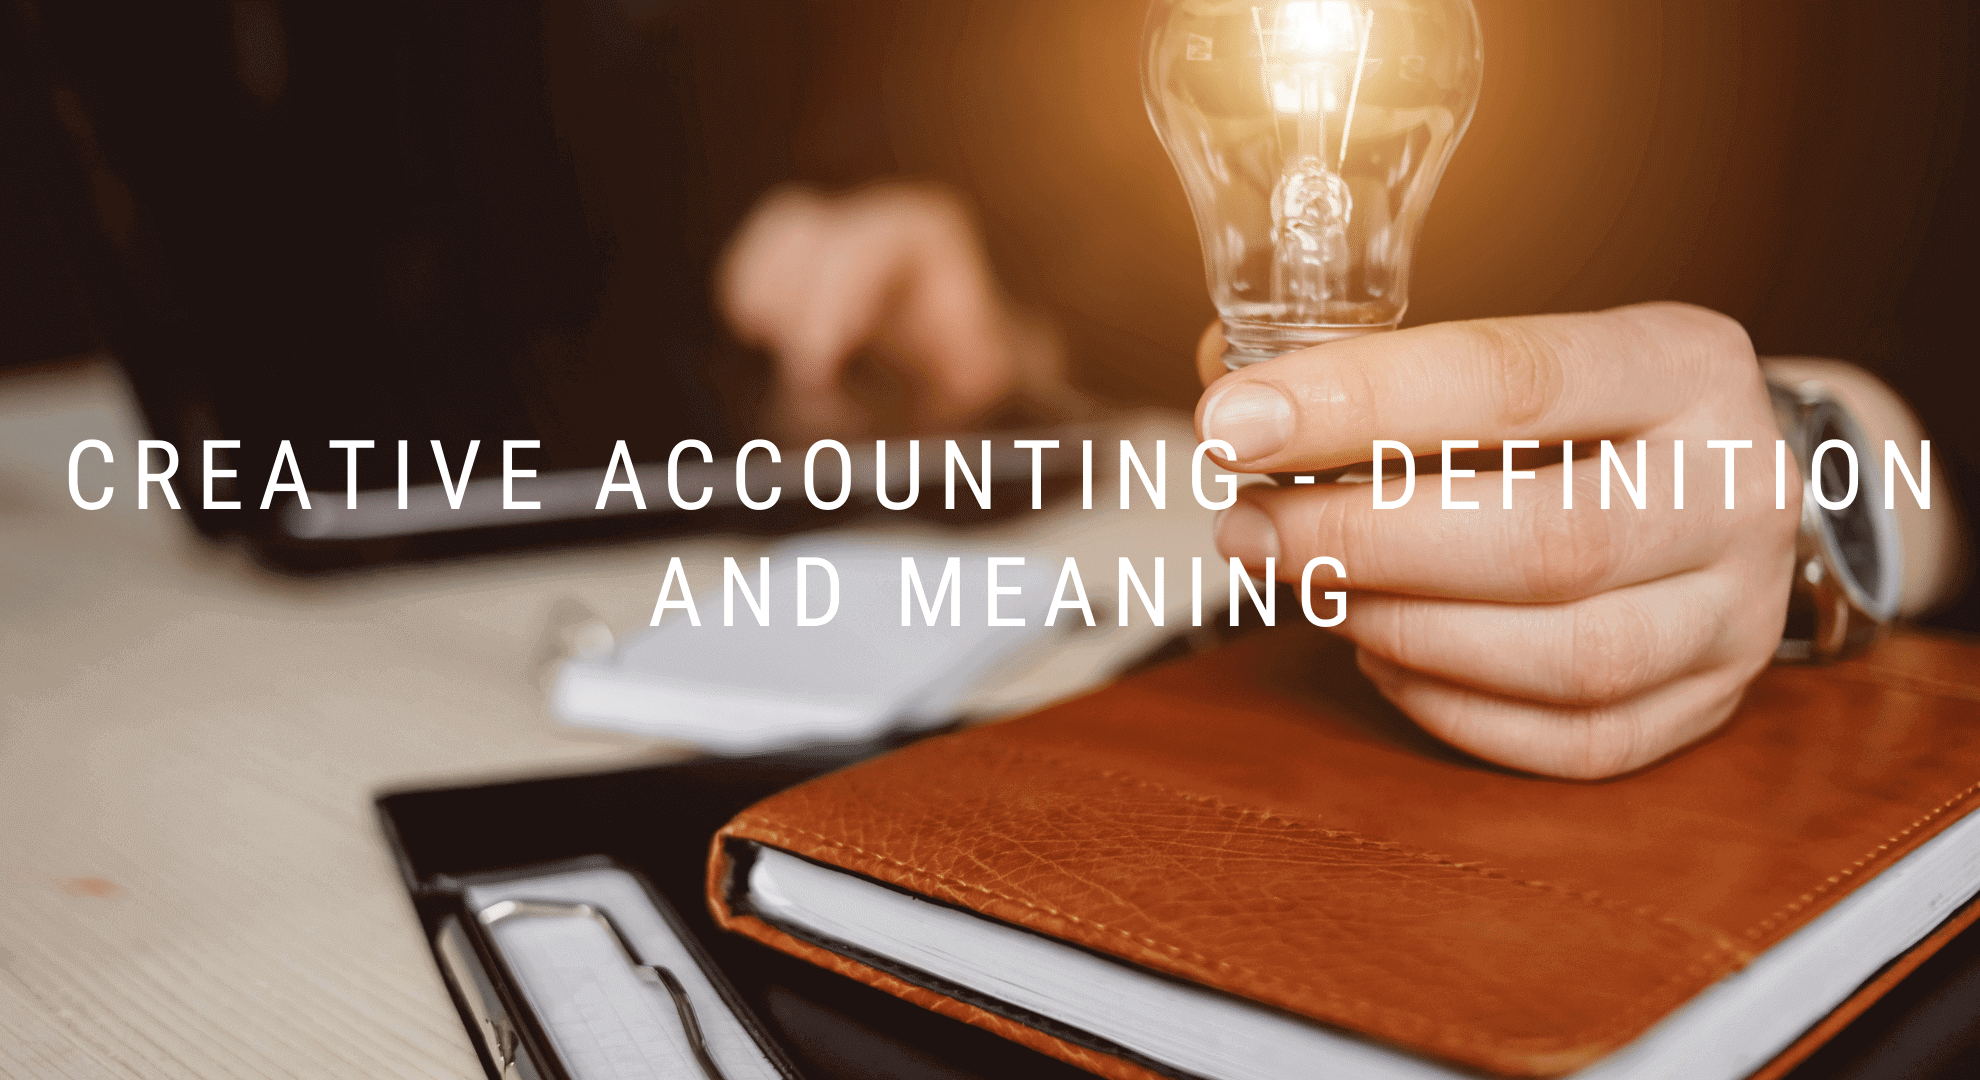 creative accounting practices